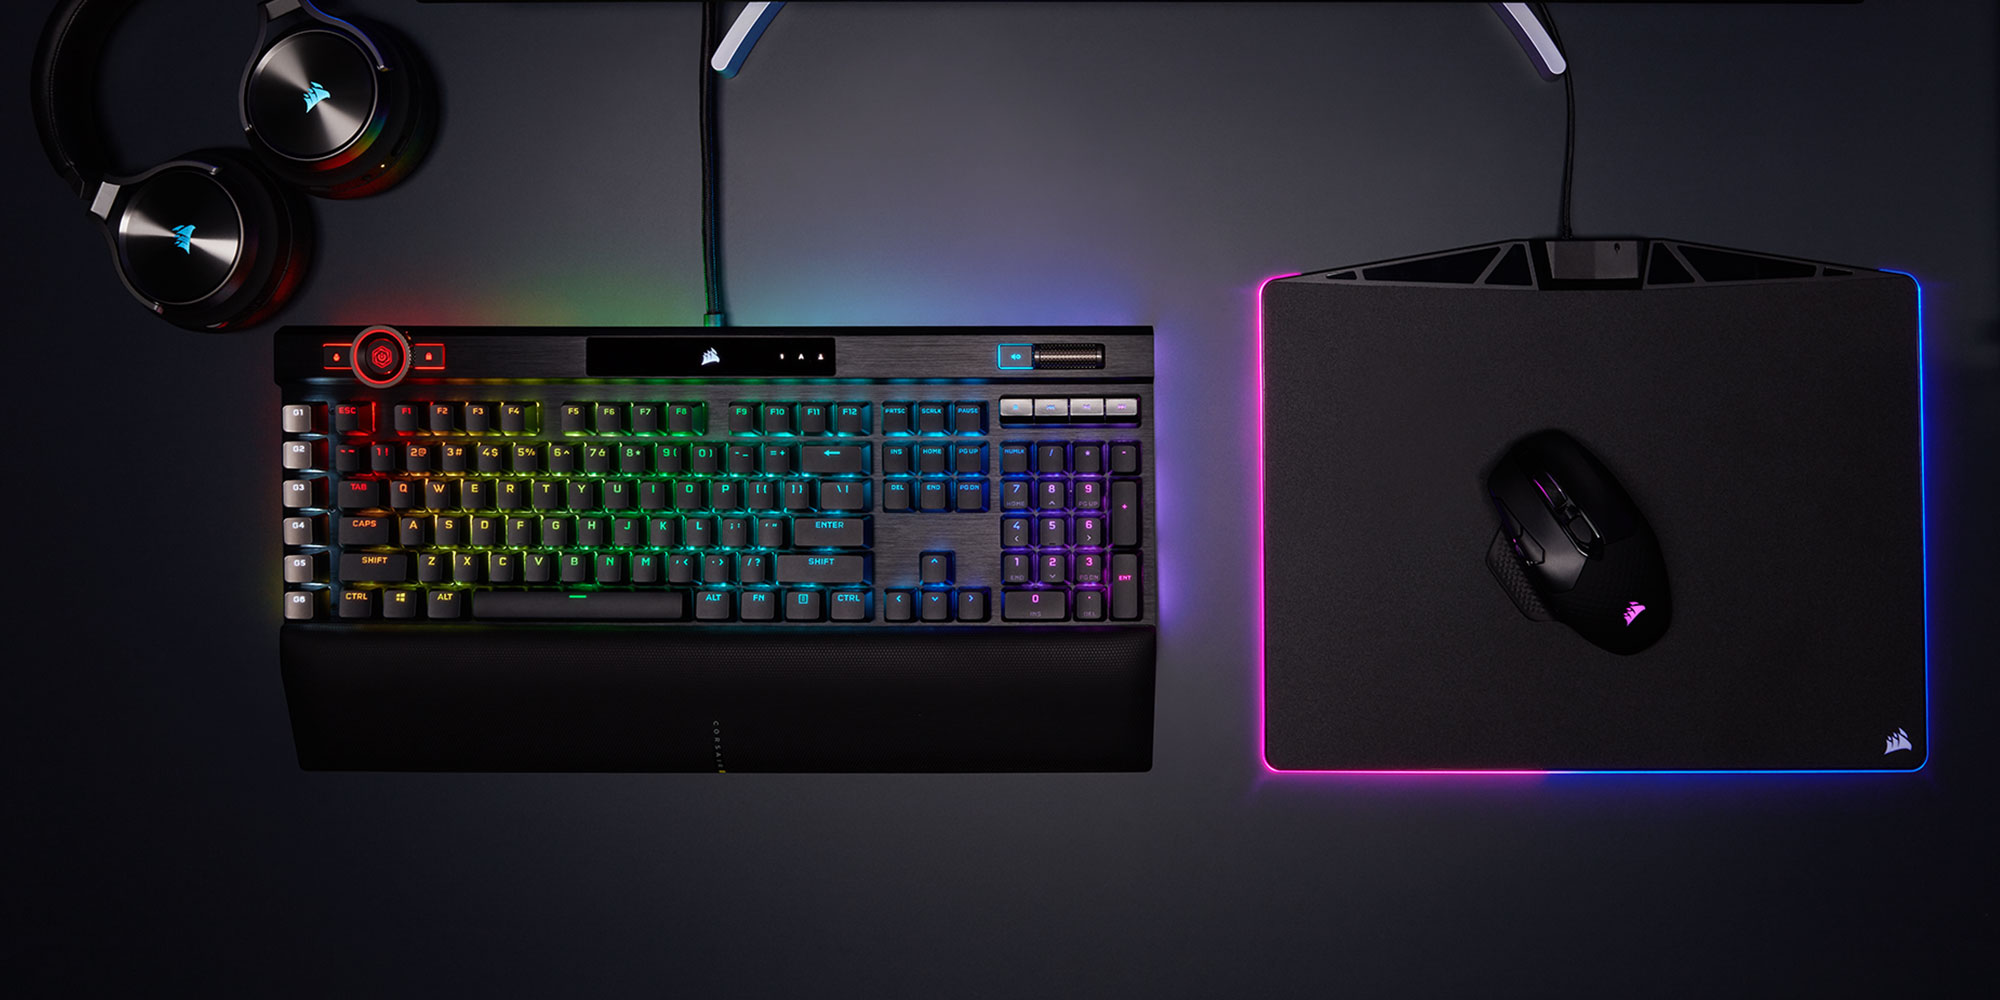 Corsair K100 Rgb Mechanical Keyboard With 44 Zone Lightedge More Hits 0 9to5toys